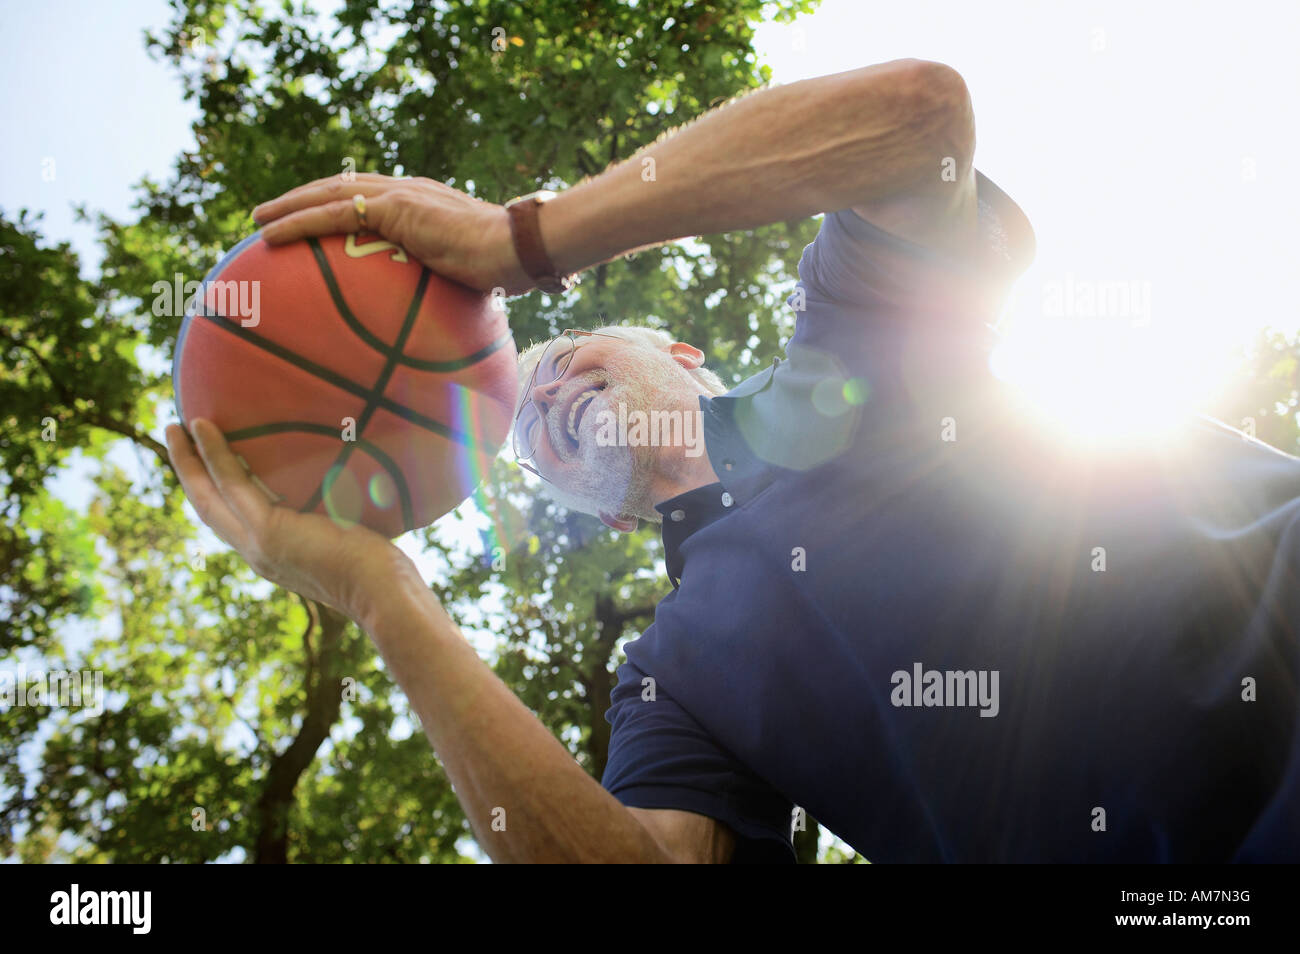 Bestager 60+ playing ball Stock Photo